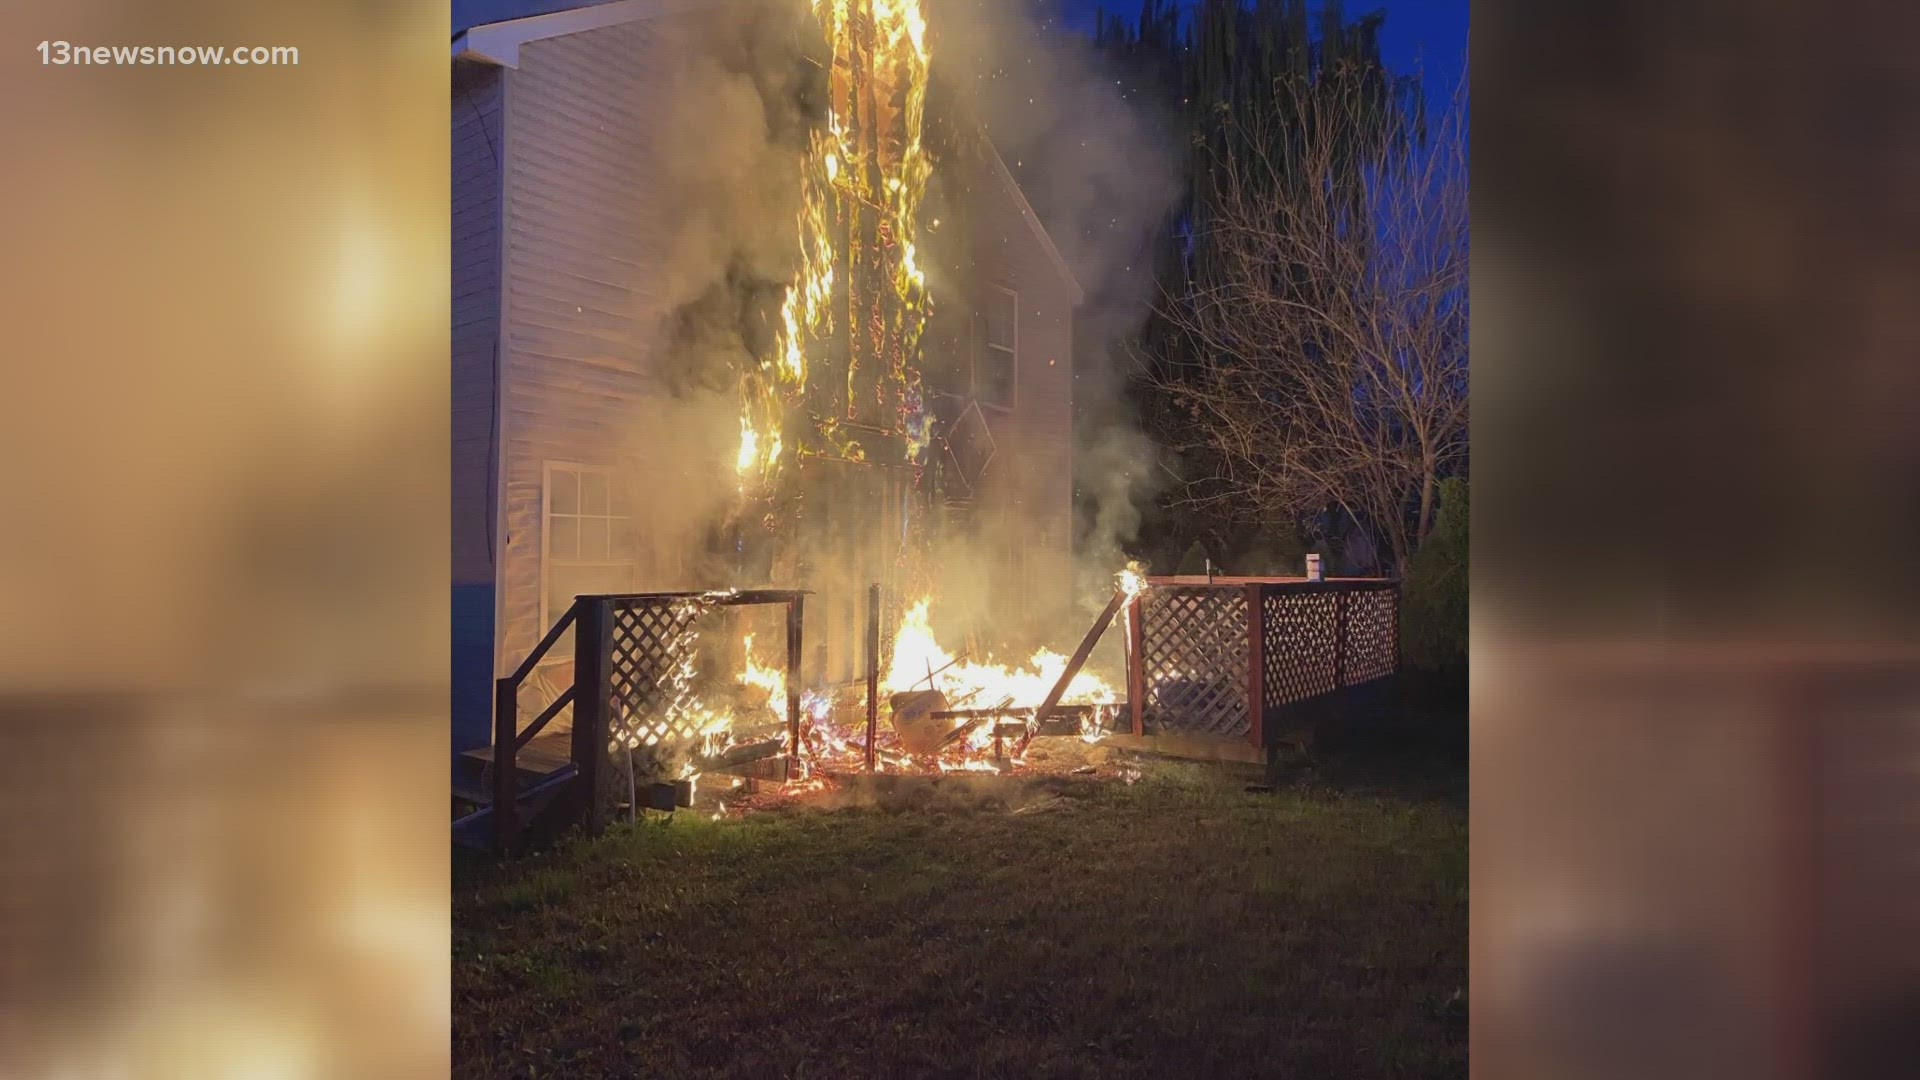 The Chesapeake Fire Department says that they received a call about a fire in the South Norfolk area of the City at about 6:00 a.m.